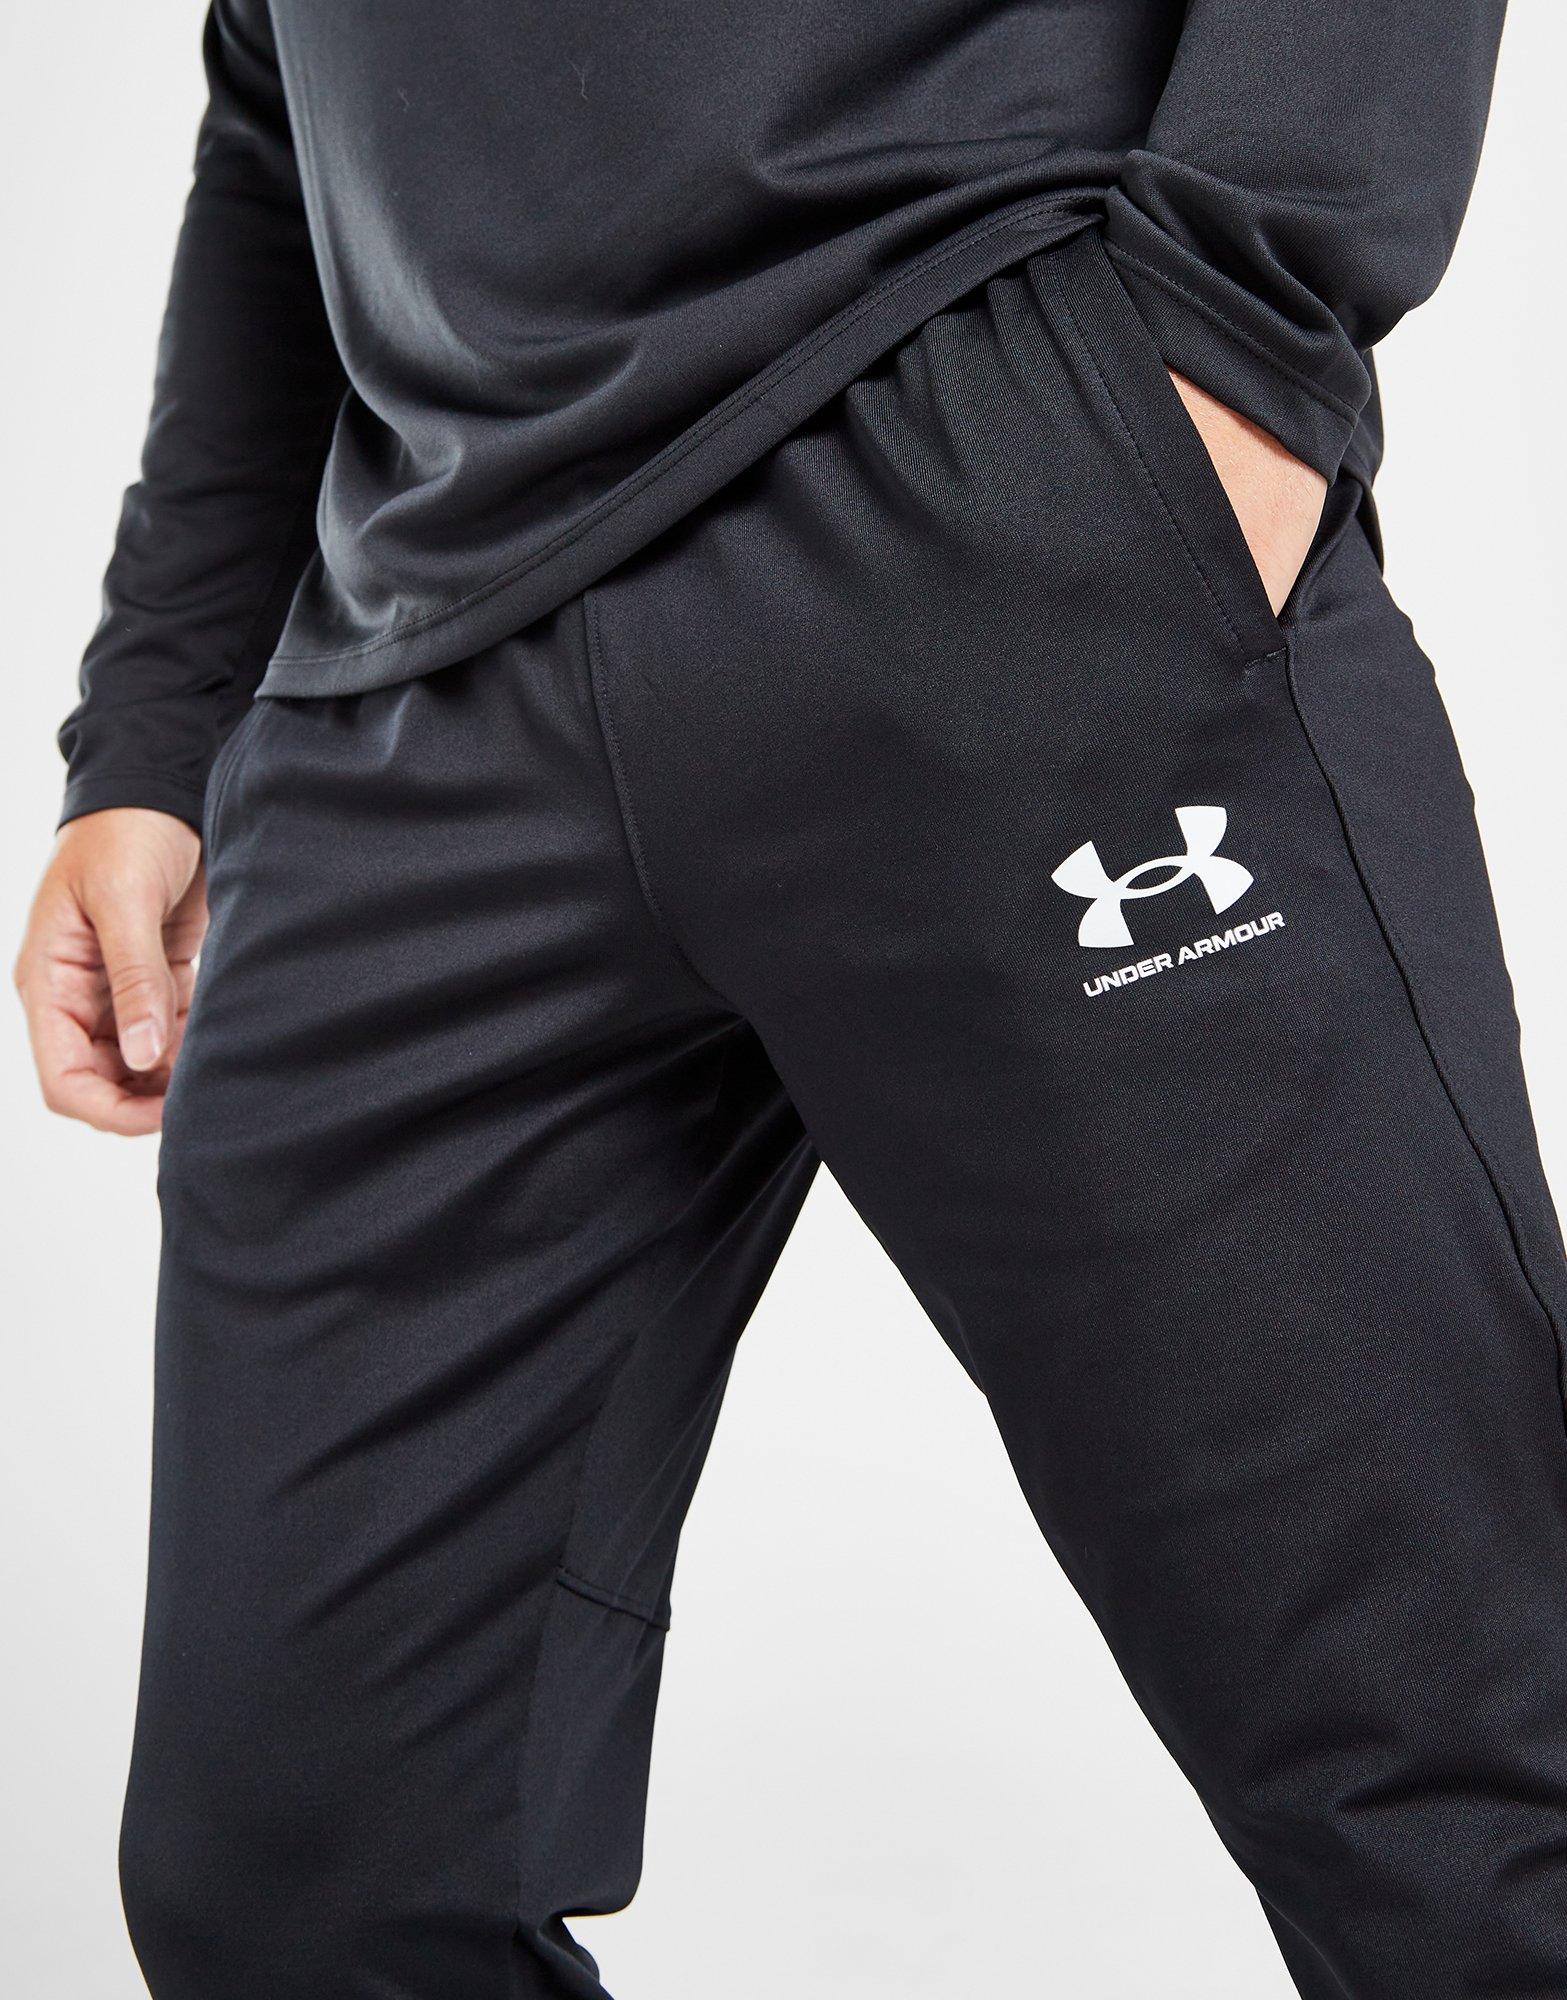 Under Armour Challenger II Training Pants Youth